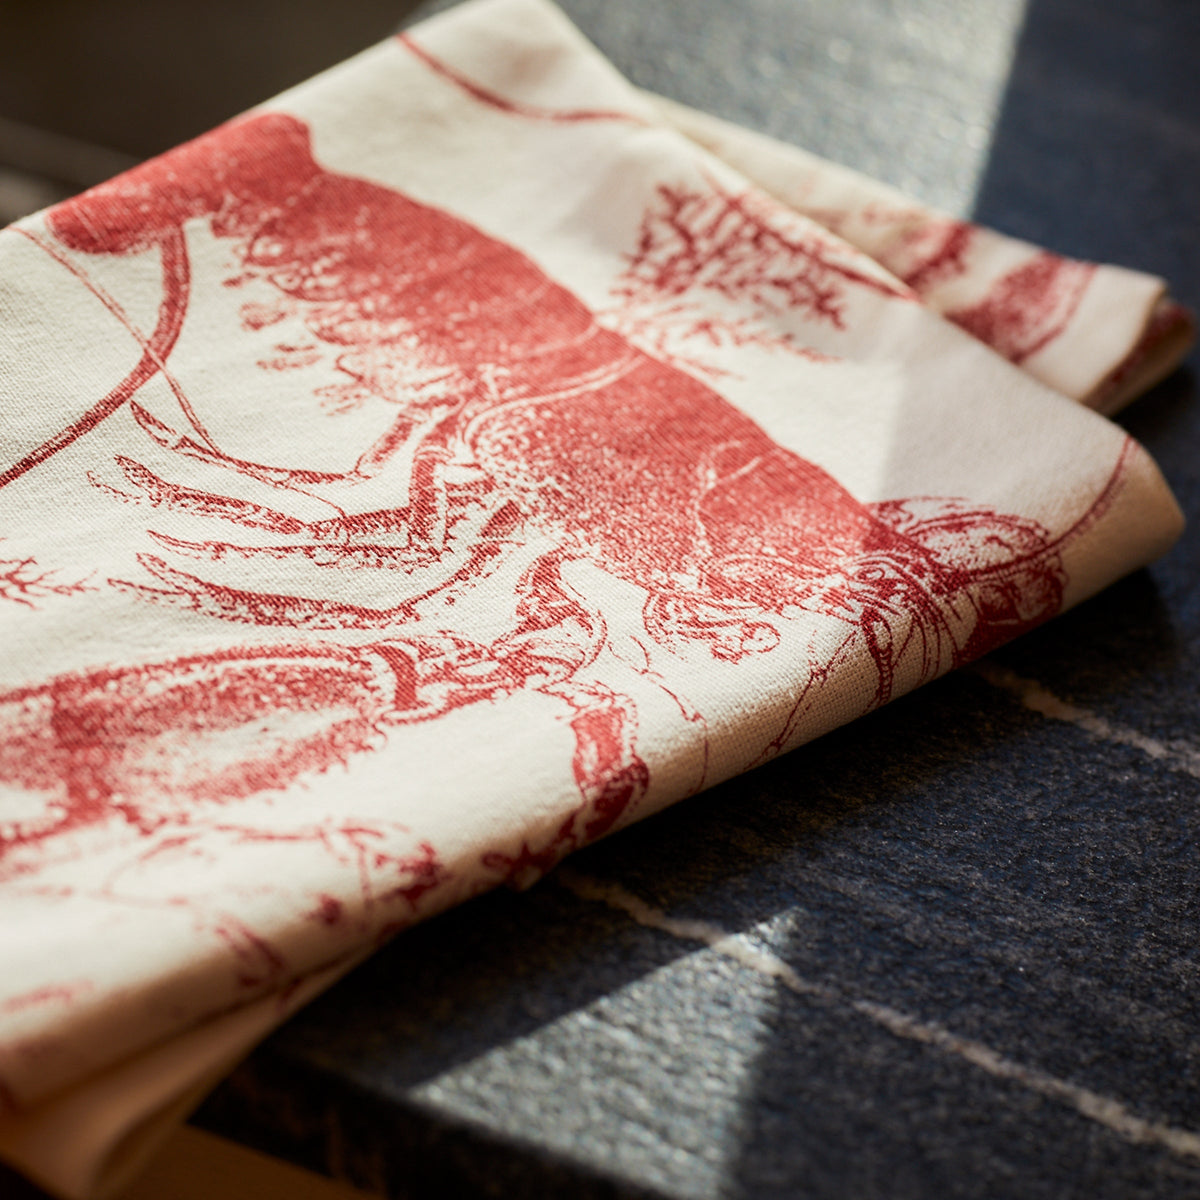 Lobster Kitchen Towel Set of 2 Mixed in Red and White Cotton from Caskata